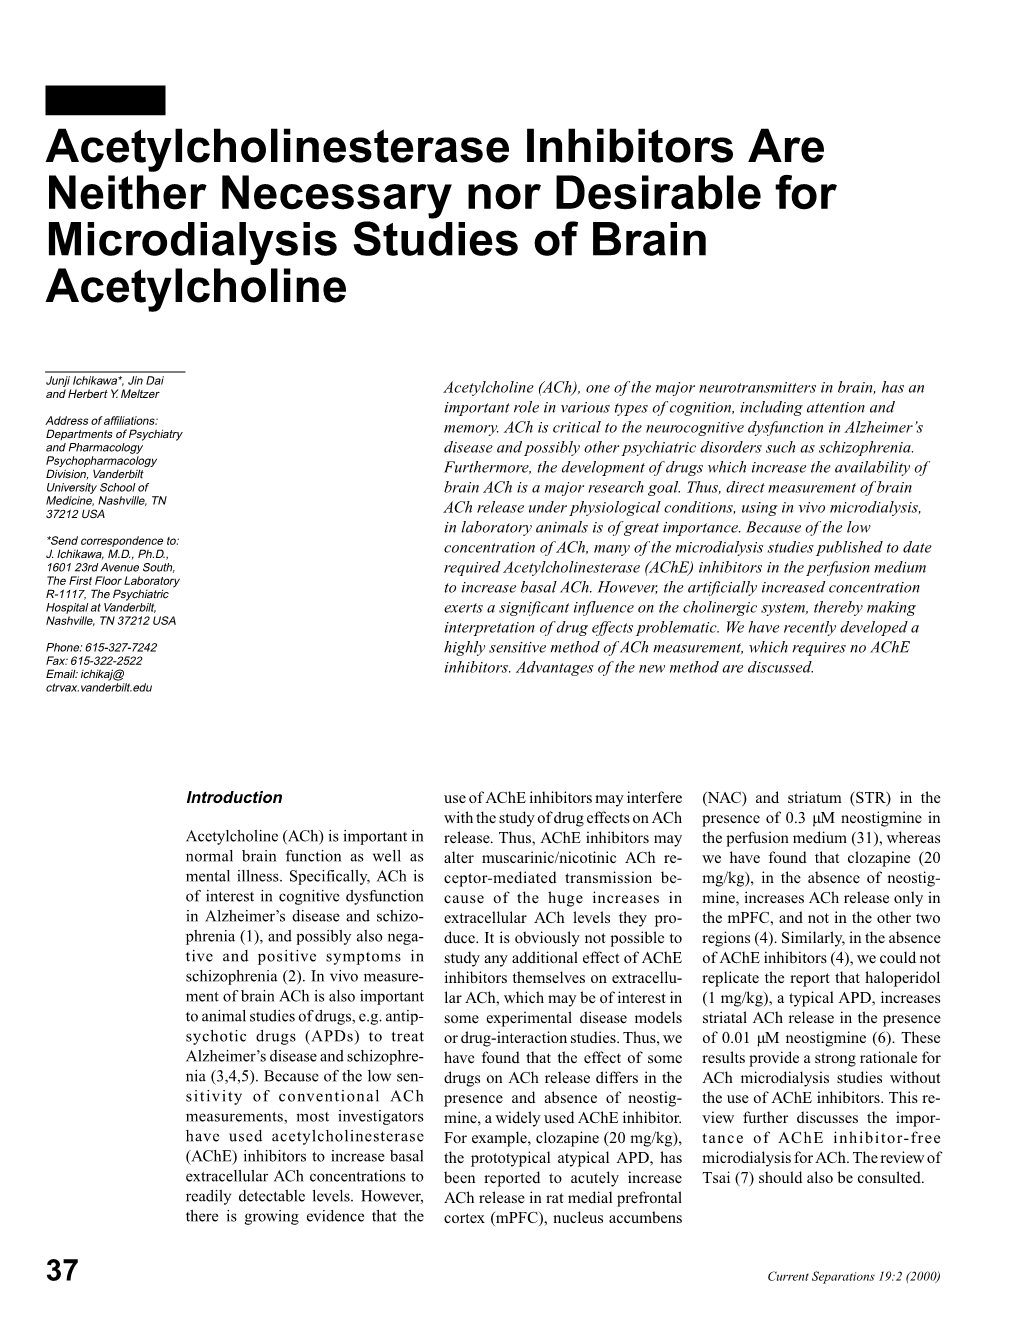 Acetylcholinesterase Inhibitors Are Neither Necessary Nor Desirable for Microdialysis Studies of Brain Acetylcholine